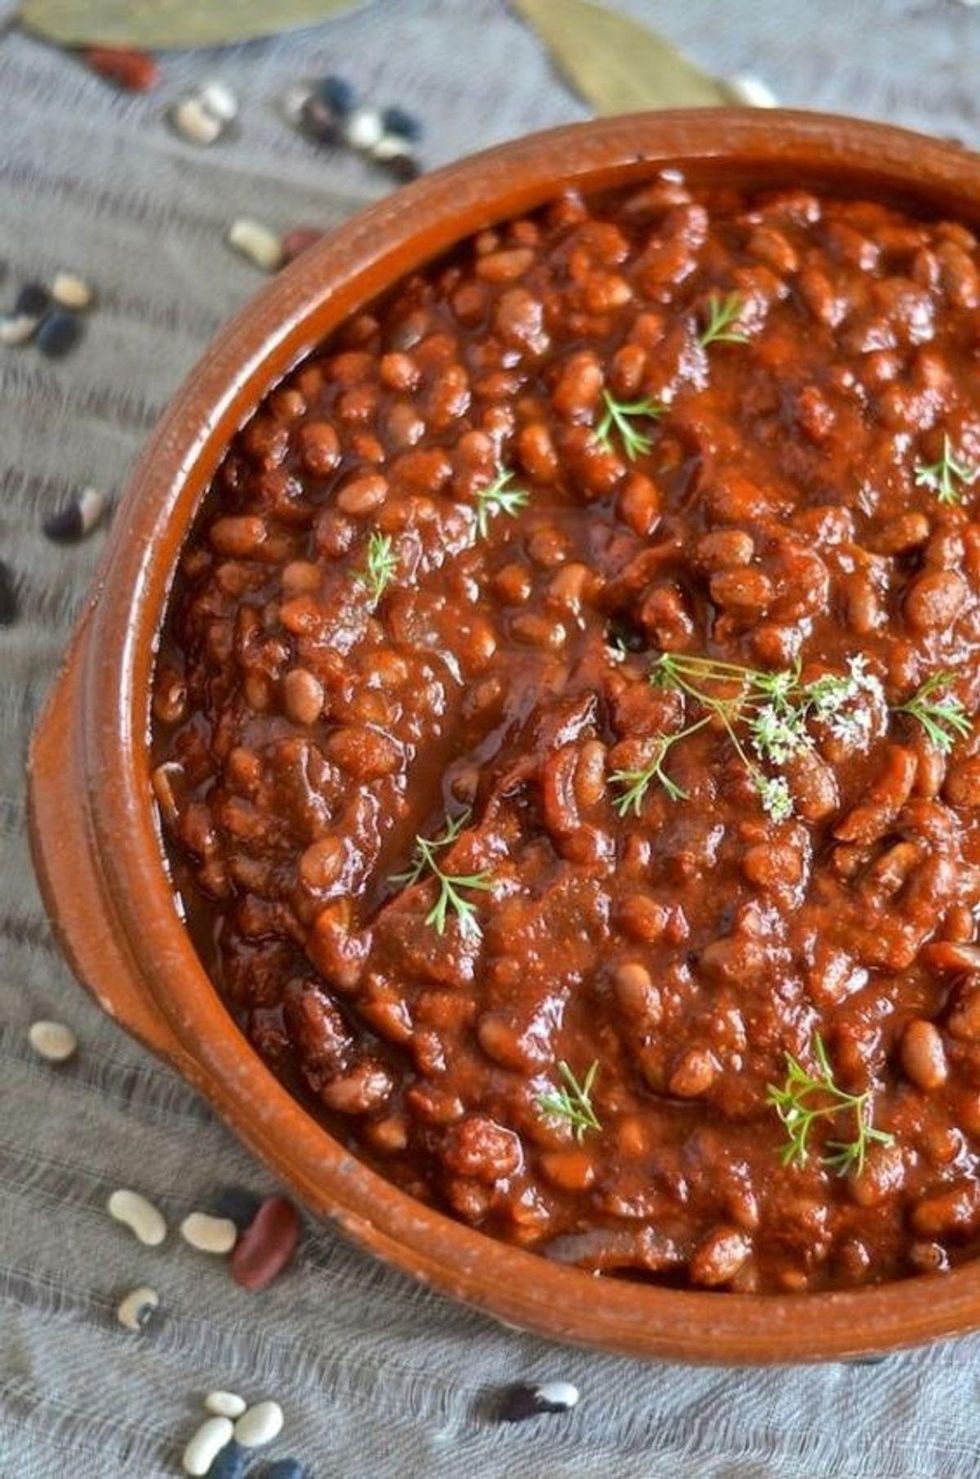 Vegan Barbecue Baked Beans